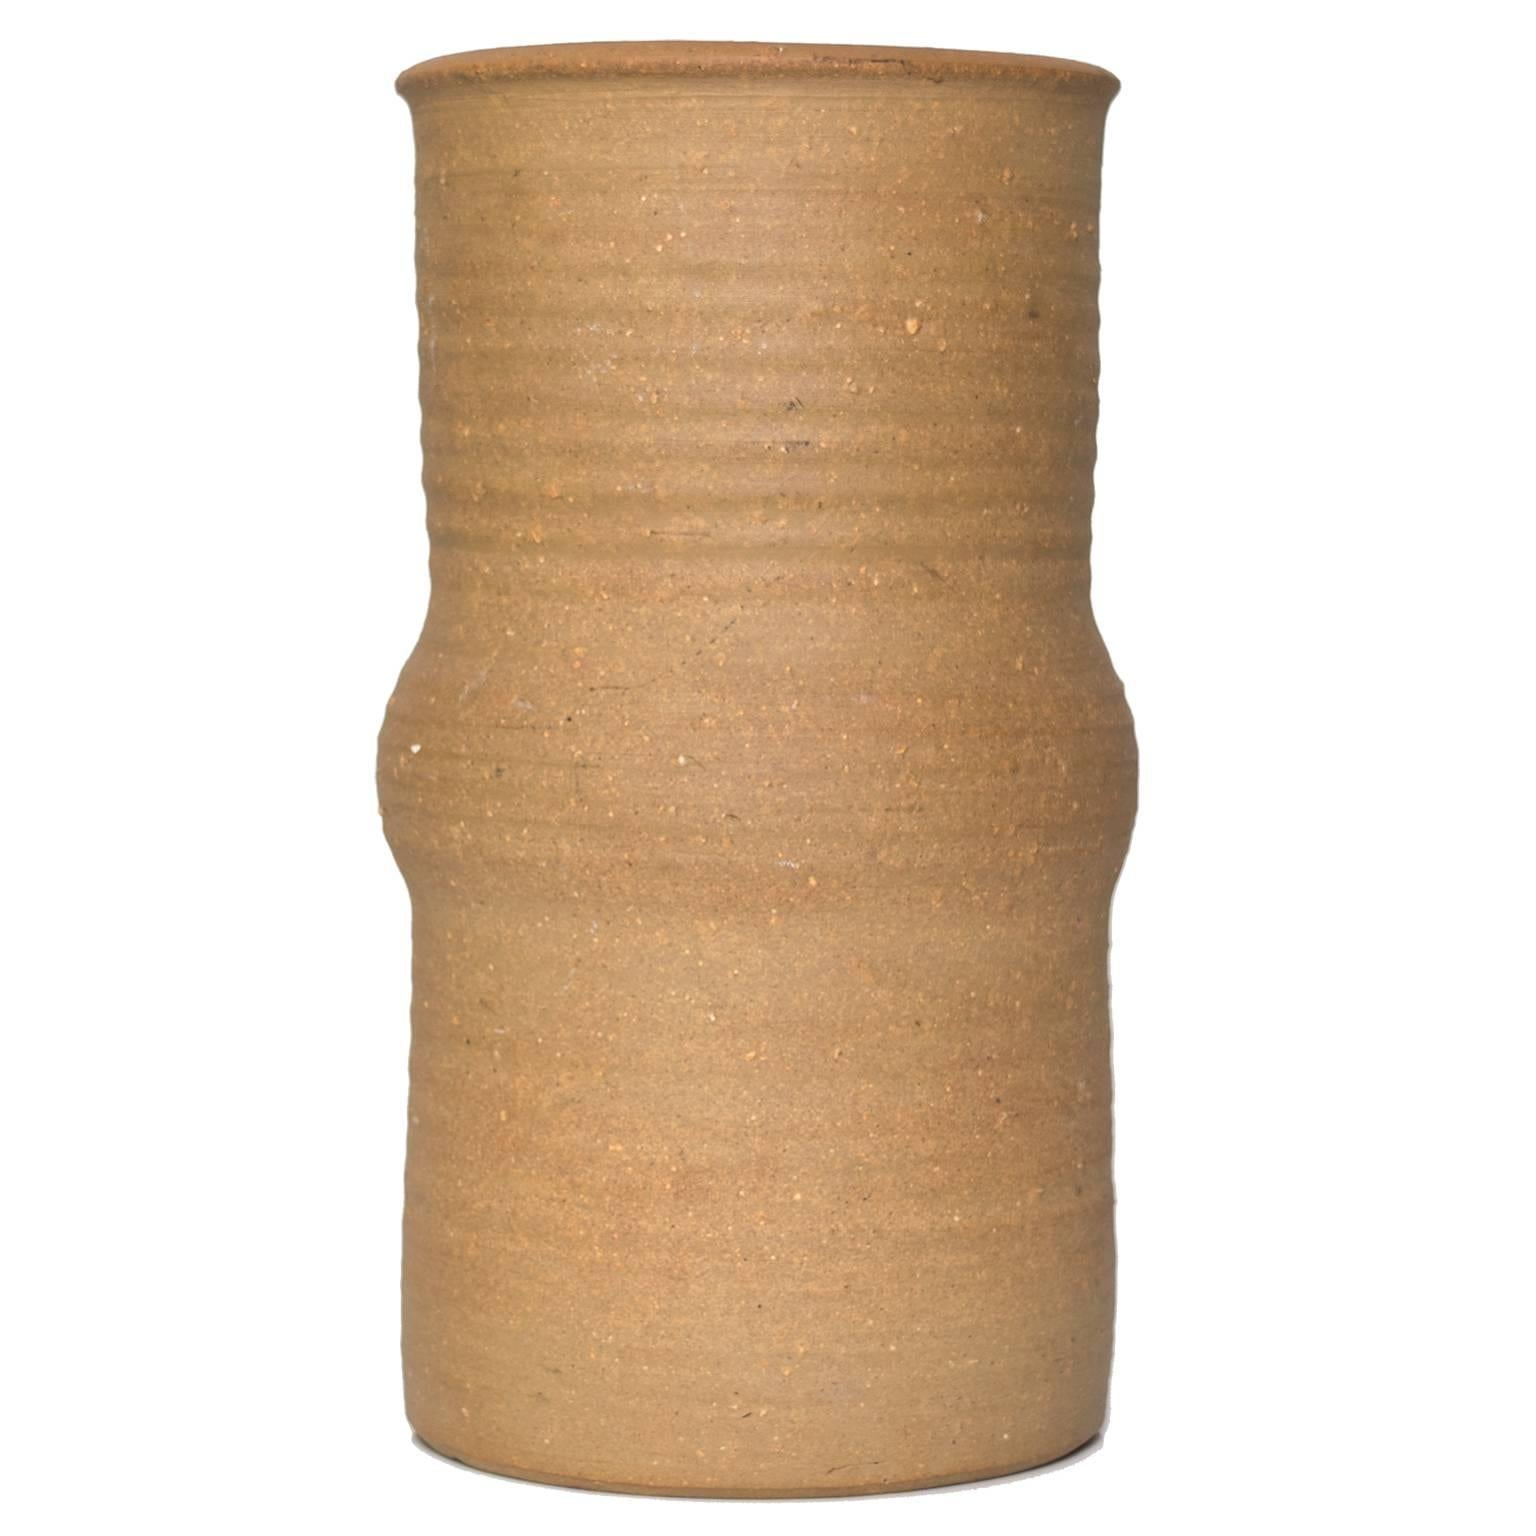 Tall Scandinavian Modern Ceramic Vase by Signe Persson-Melin